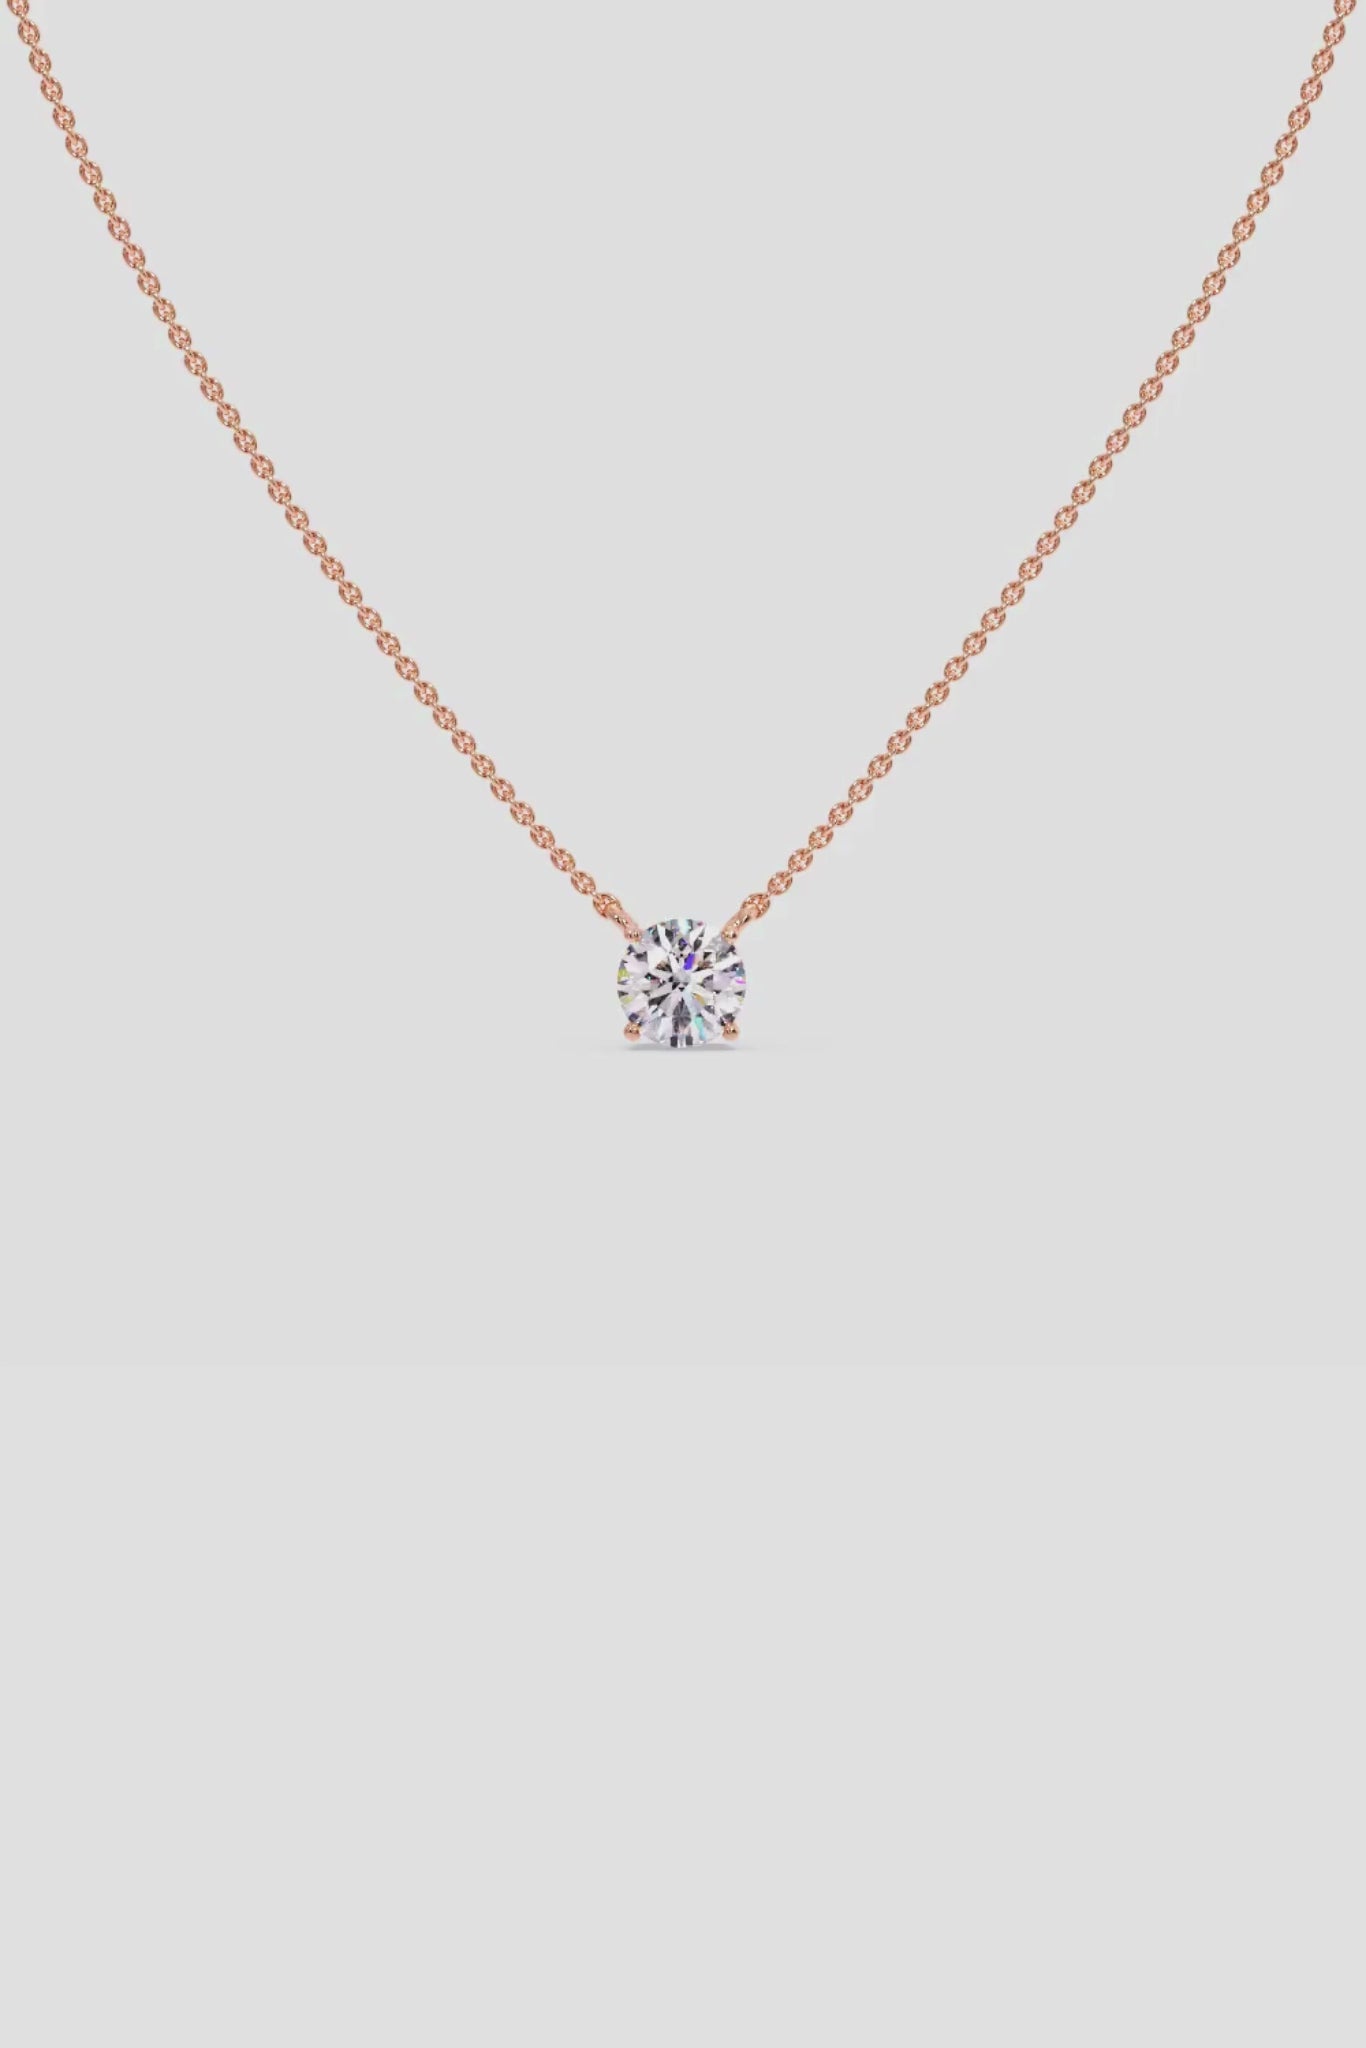 1 ct Solitaire Necklace